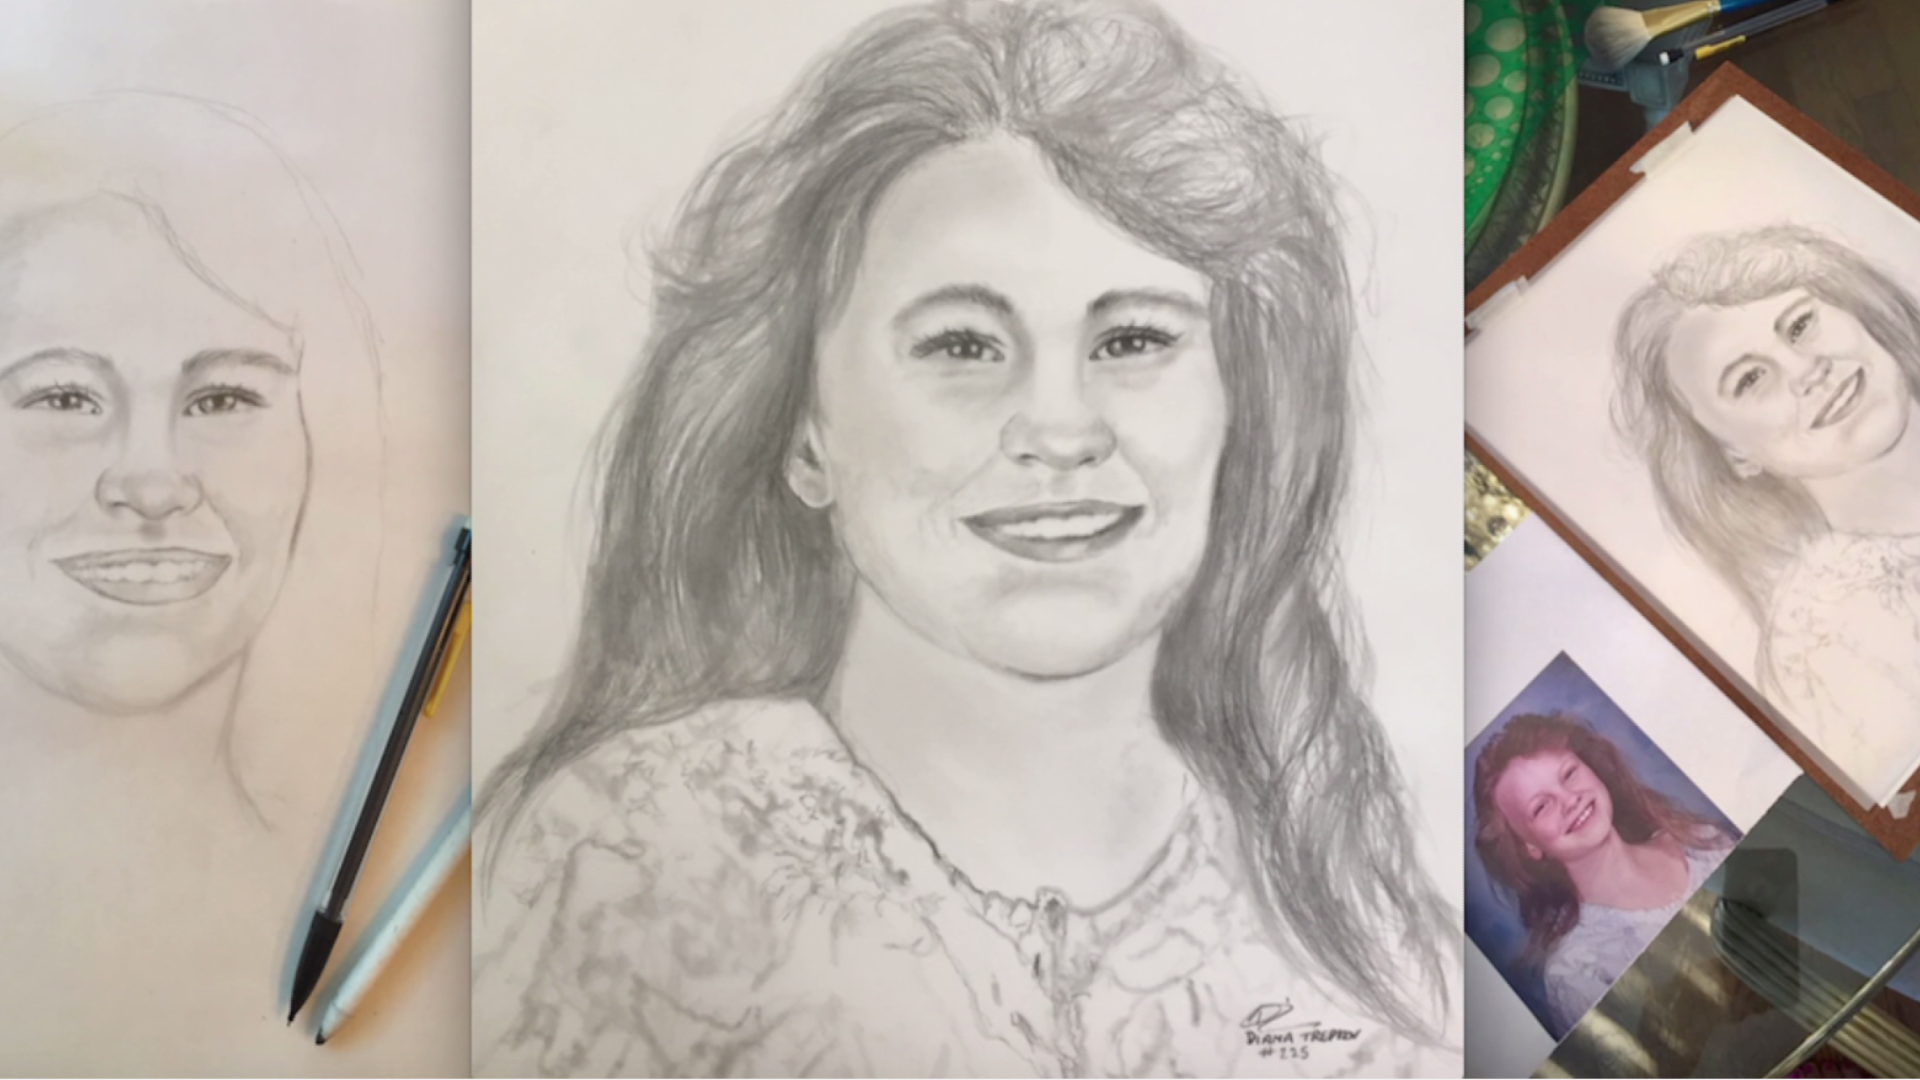 A portrait artist’s gift brings the 9-year-old back to life for the side of her family that grieved in private.